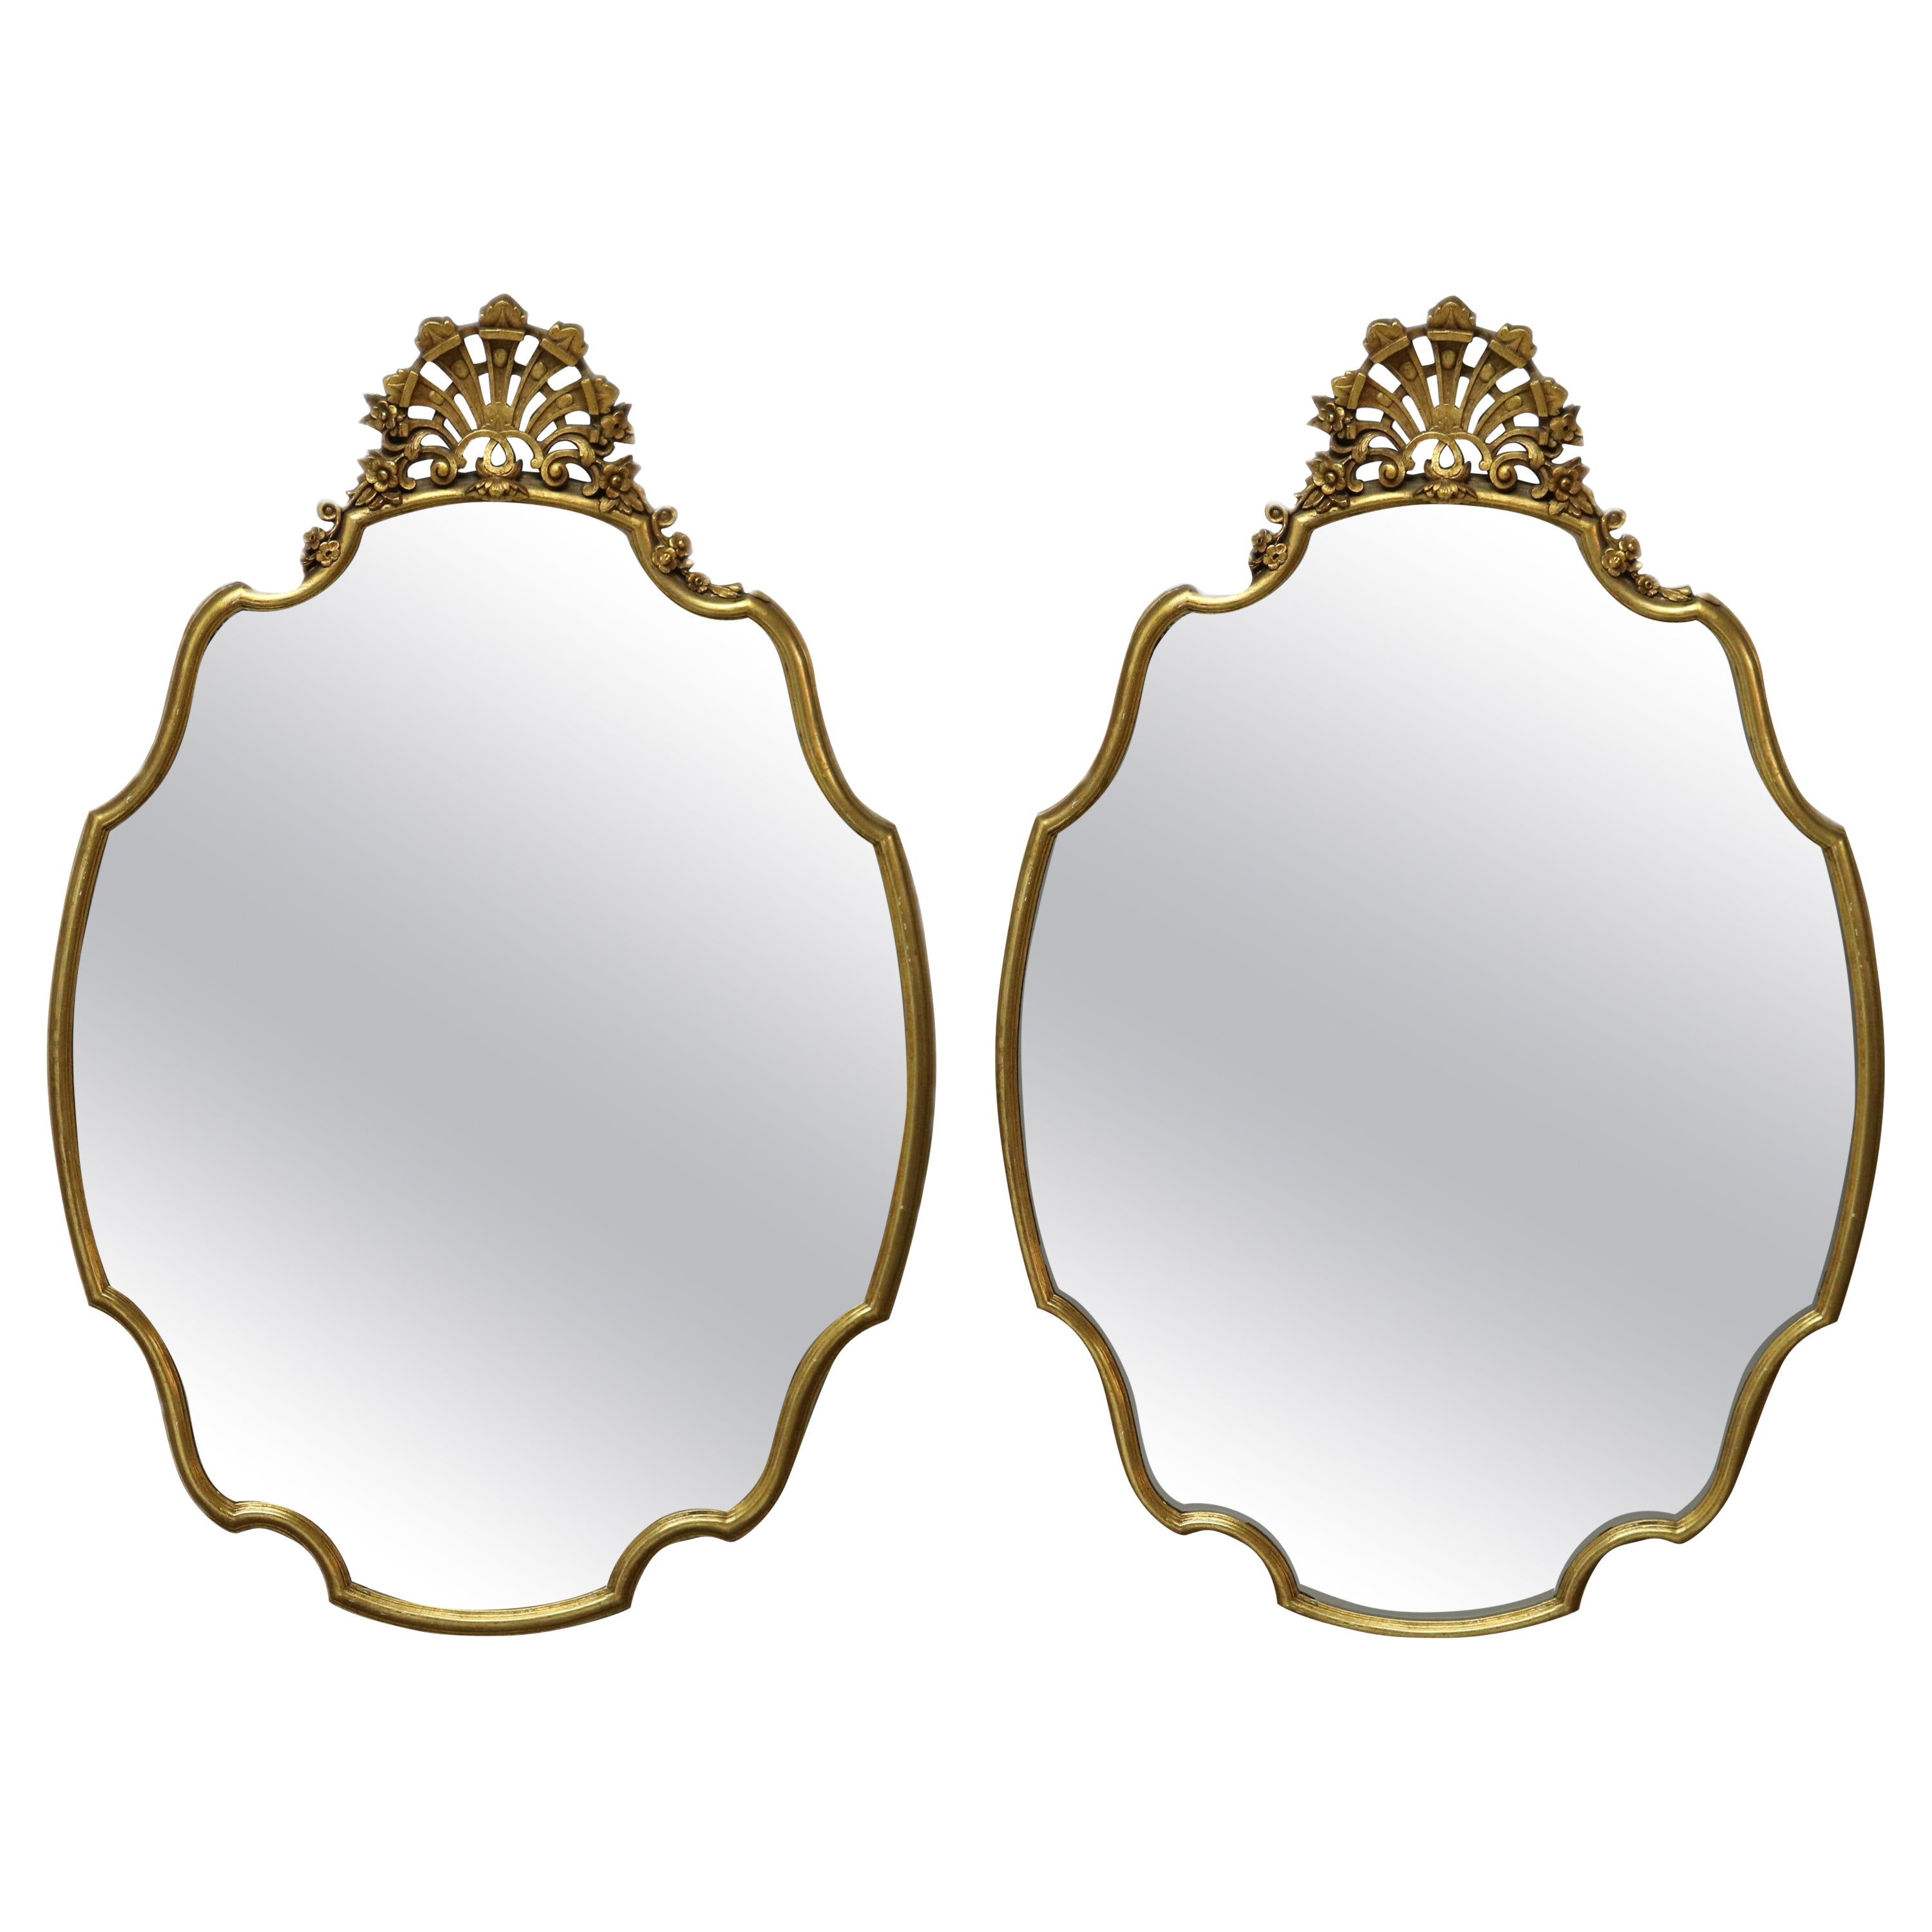 Antique Pair French Style Reticulated Shield Form Giltwood Wall Mirrors, c1930